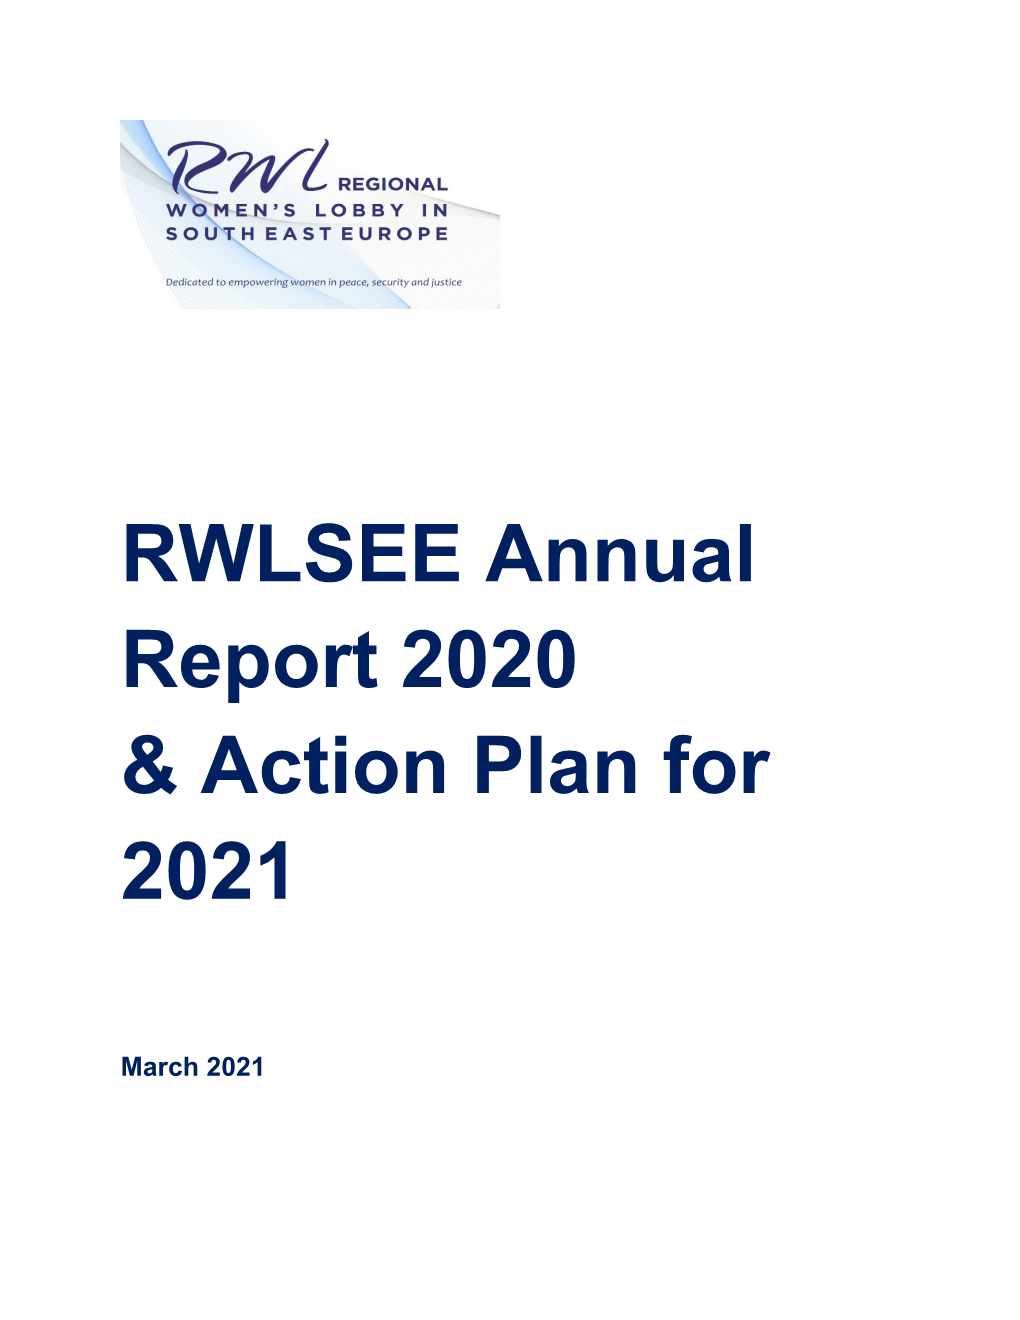 RWLSEE Annual Report 2020 & Action Plan for 2021